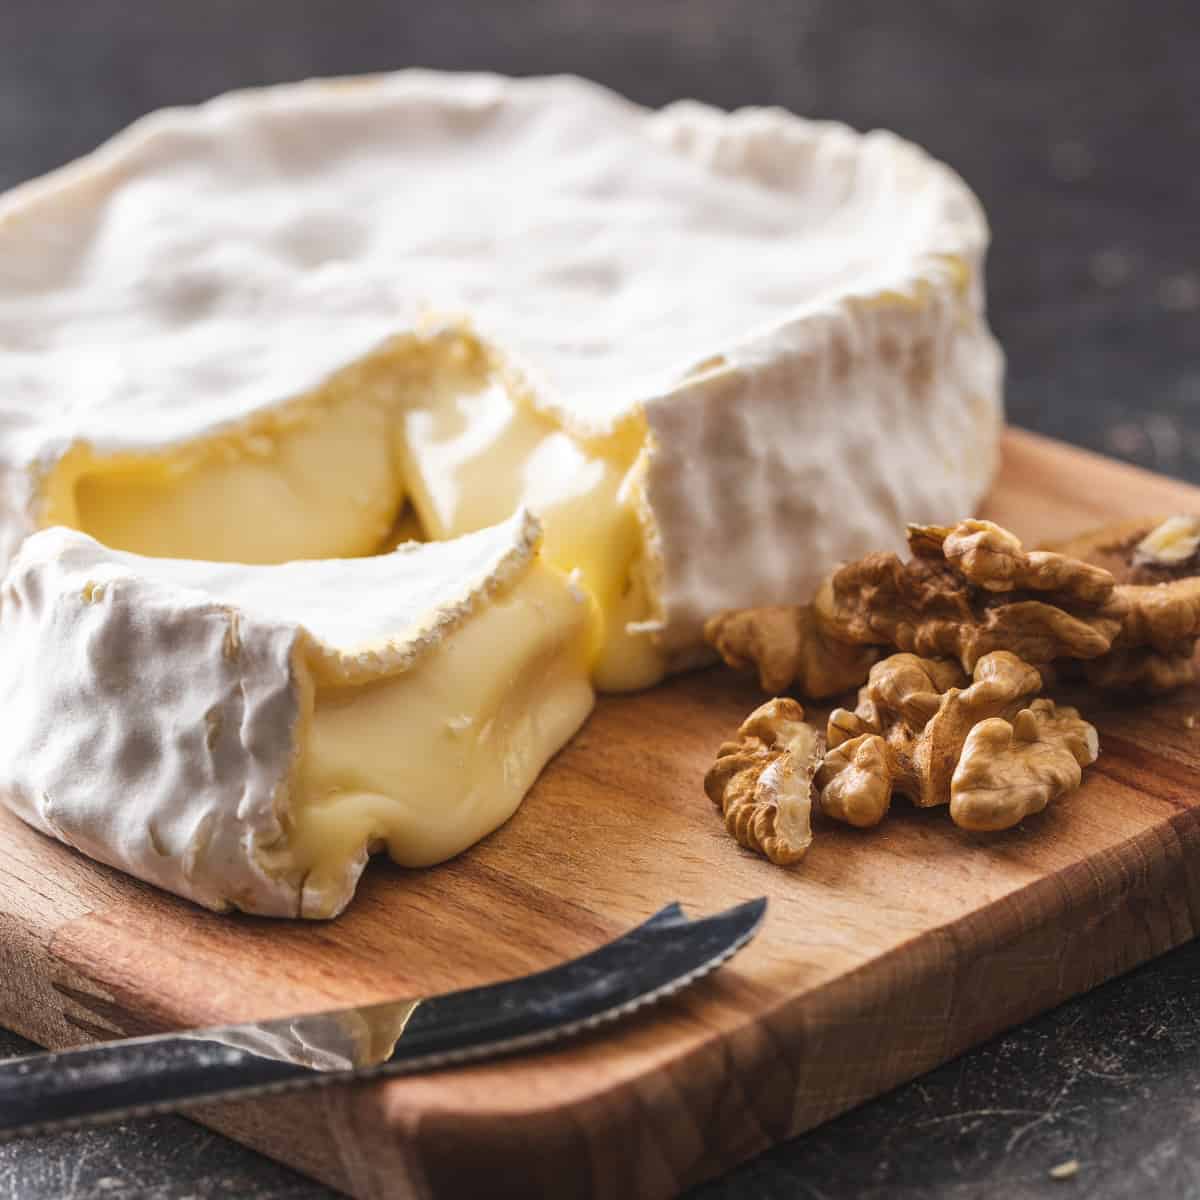 a wheel of brie with a triangular slice removed on a wooden cutting board with walnuts 